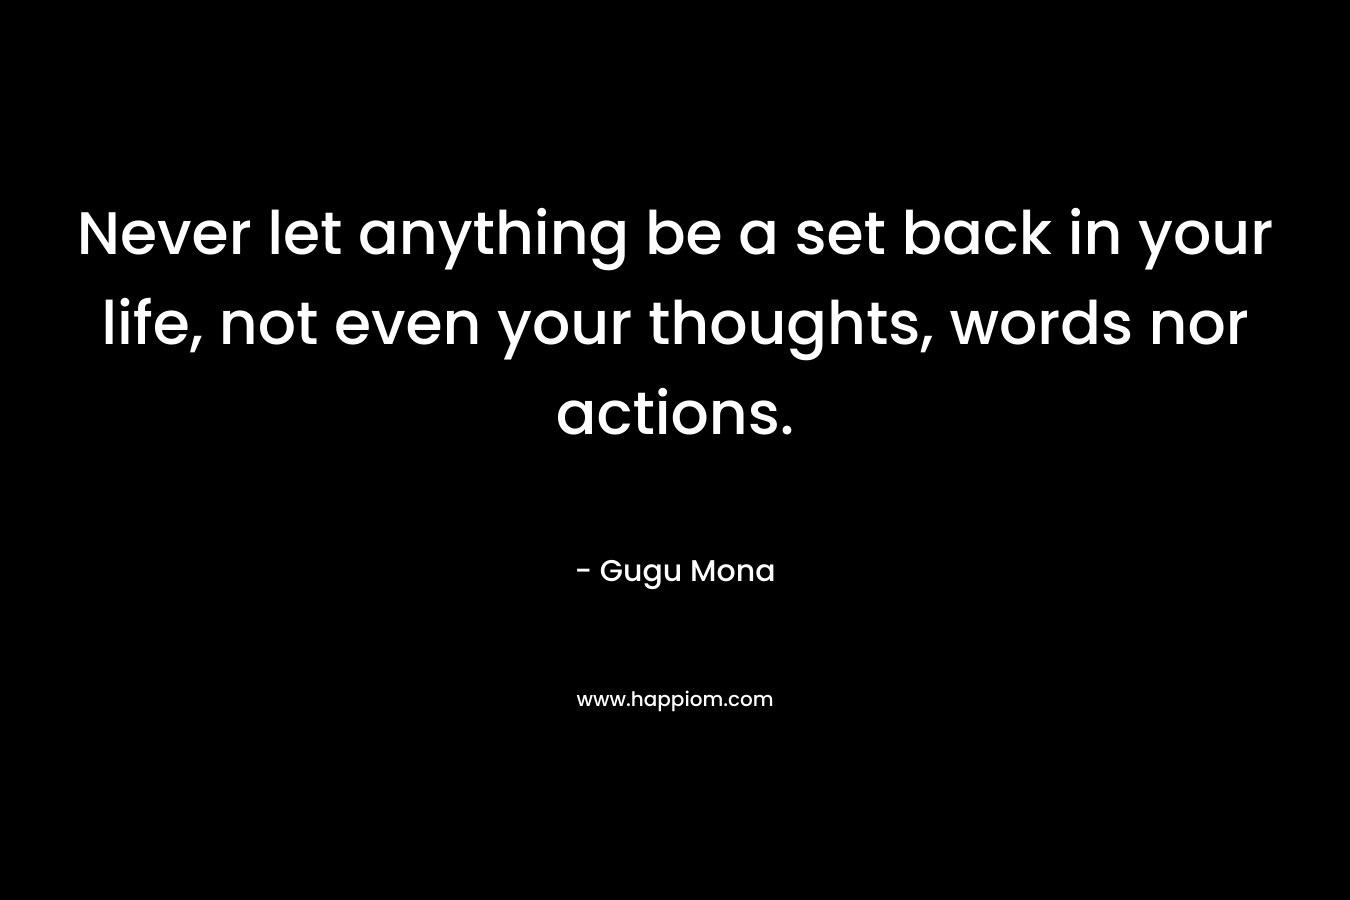 Never let anything be a set back in your life, not even your thoughts, words nor actions.